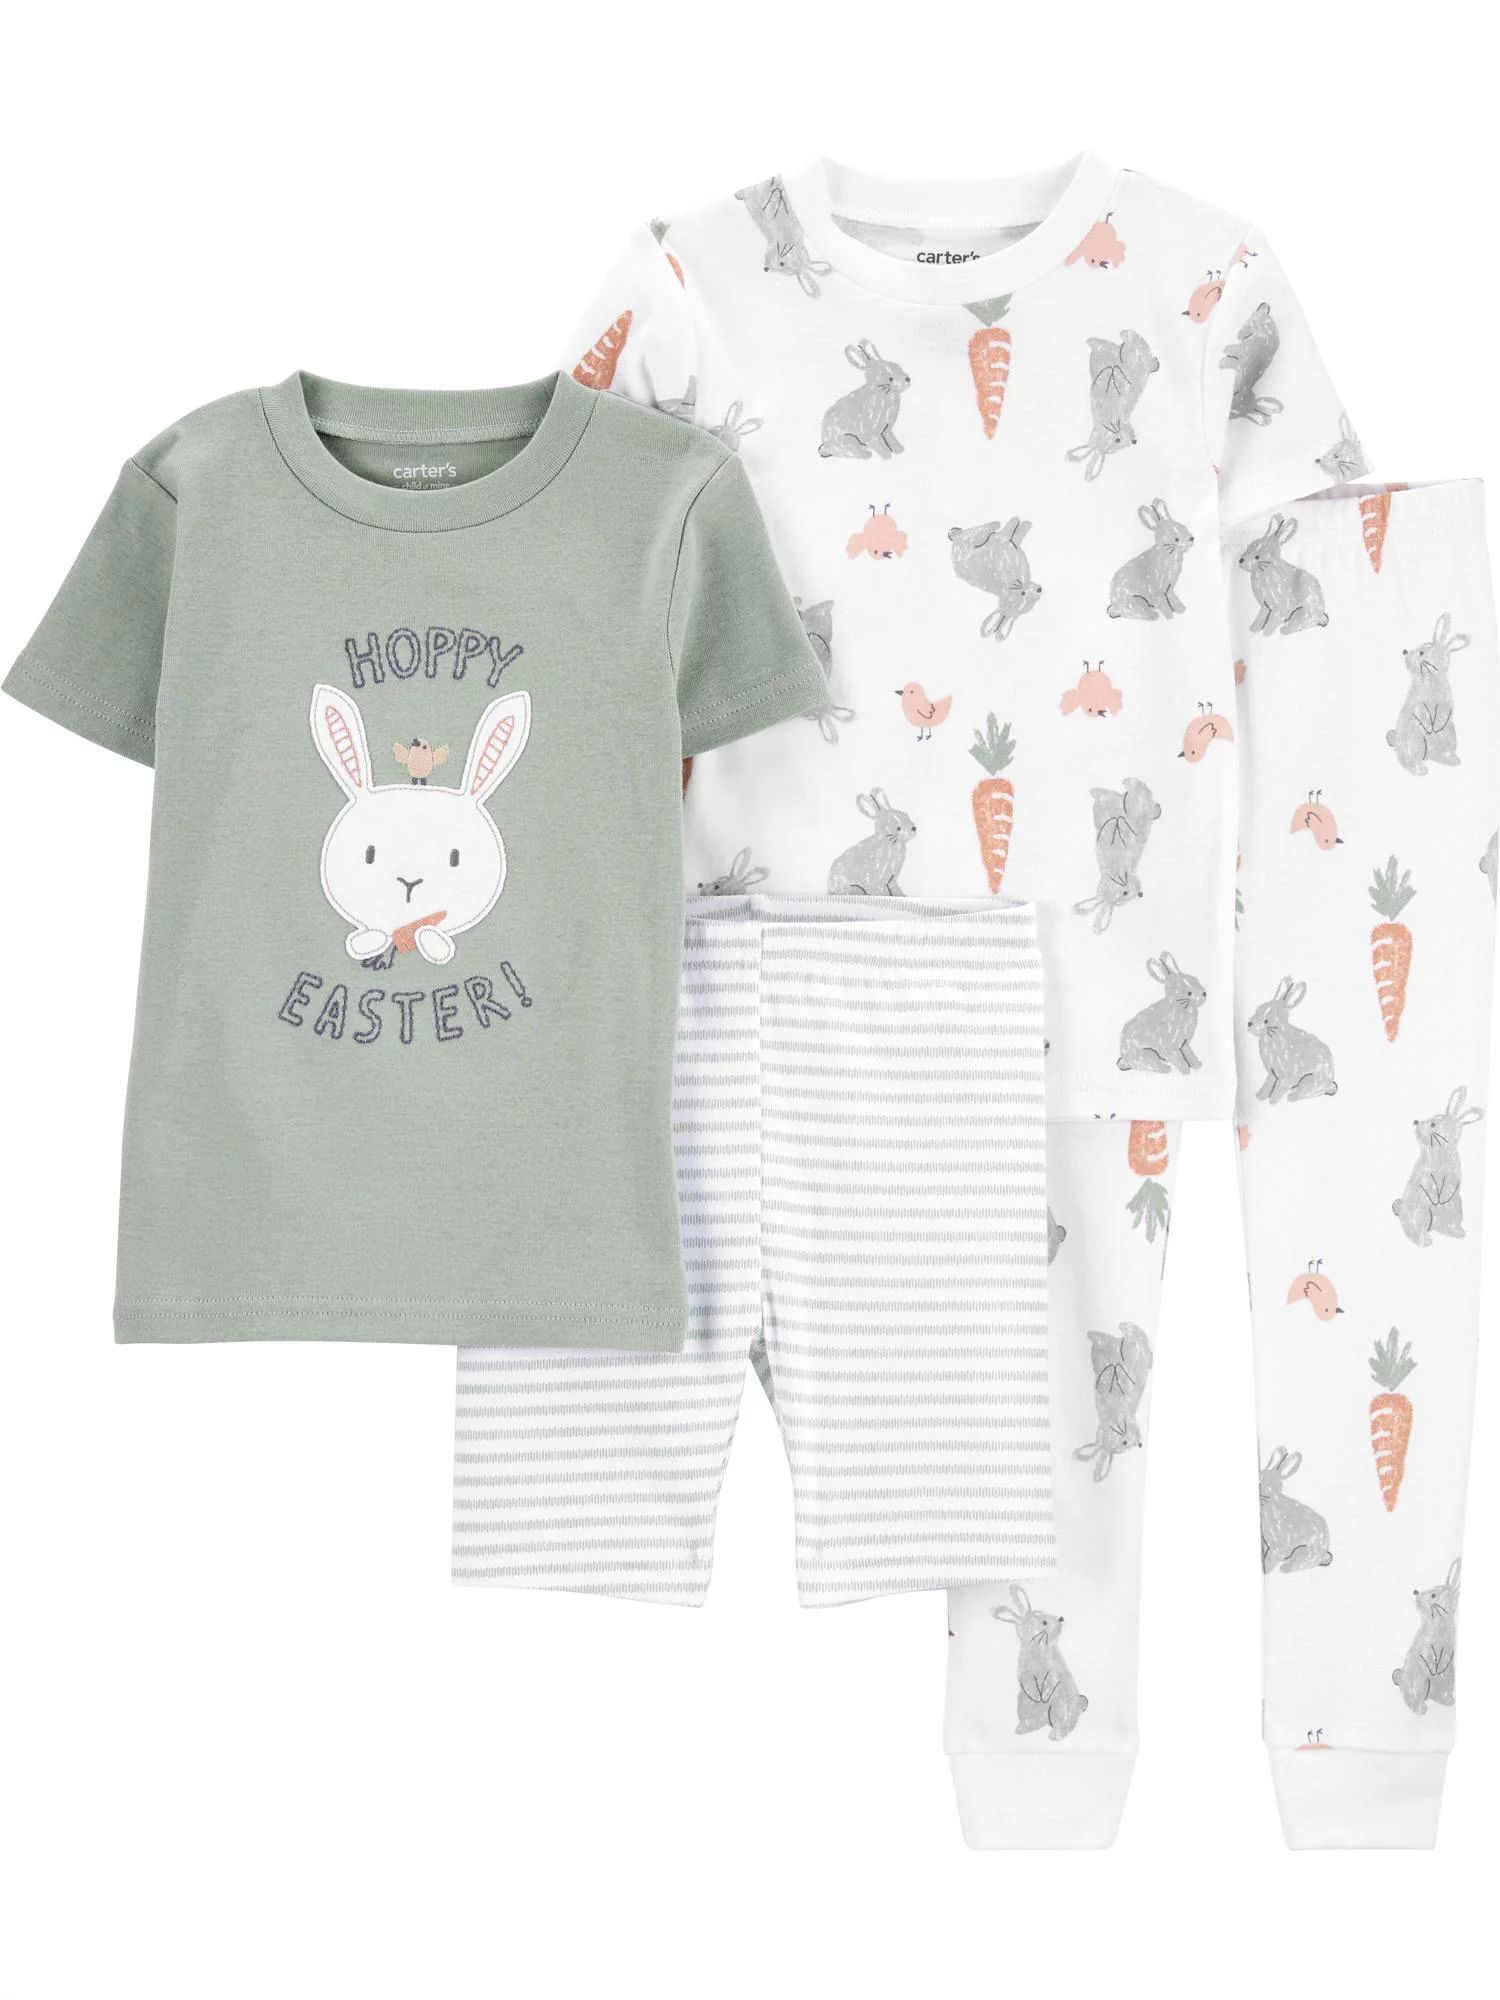 Carter's Child of Mine Baby and Toddler Unisex Easter Pajama Set, 4-Piece, Sizes 12M-5T | Walmart (US)